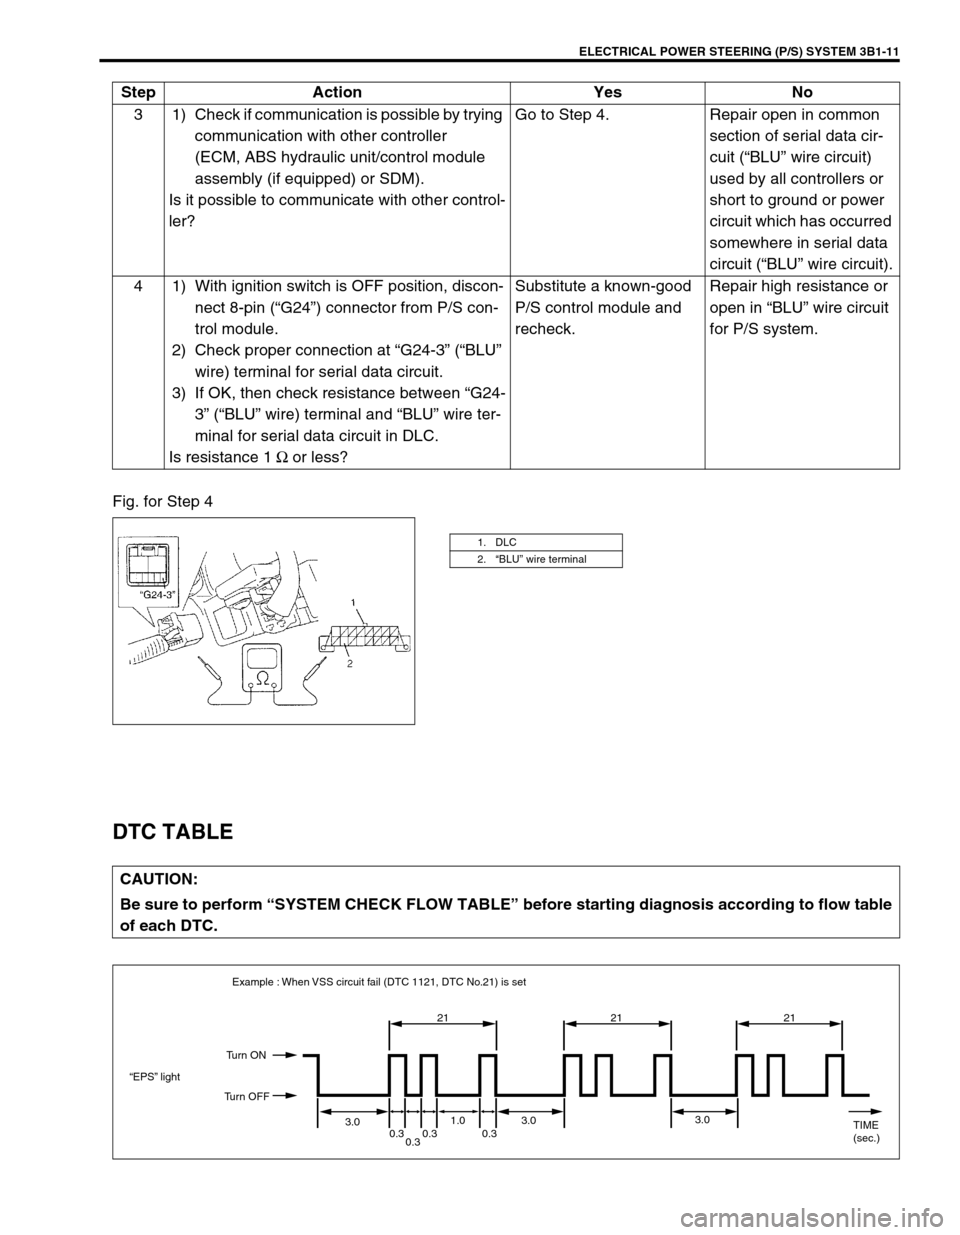 SUZUKI SWIFT 2000 1.G RG413 Service Workshop Manual ELECTRICAL POWER STEERING (P/S) SYSTEM 3B1-11
Fig. for Step 4
DTC TABLE
3 1) Check if communication is possible by trying 
communication with other controller 
(ECM, ABS hydraulic unit/control module 